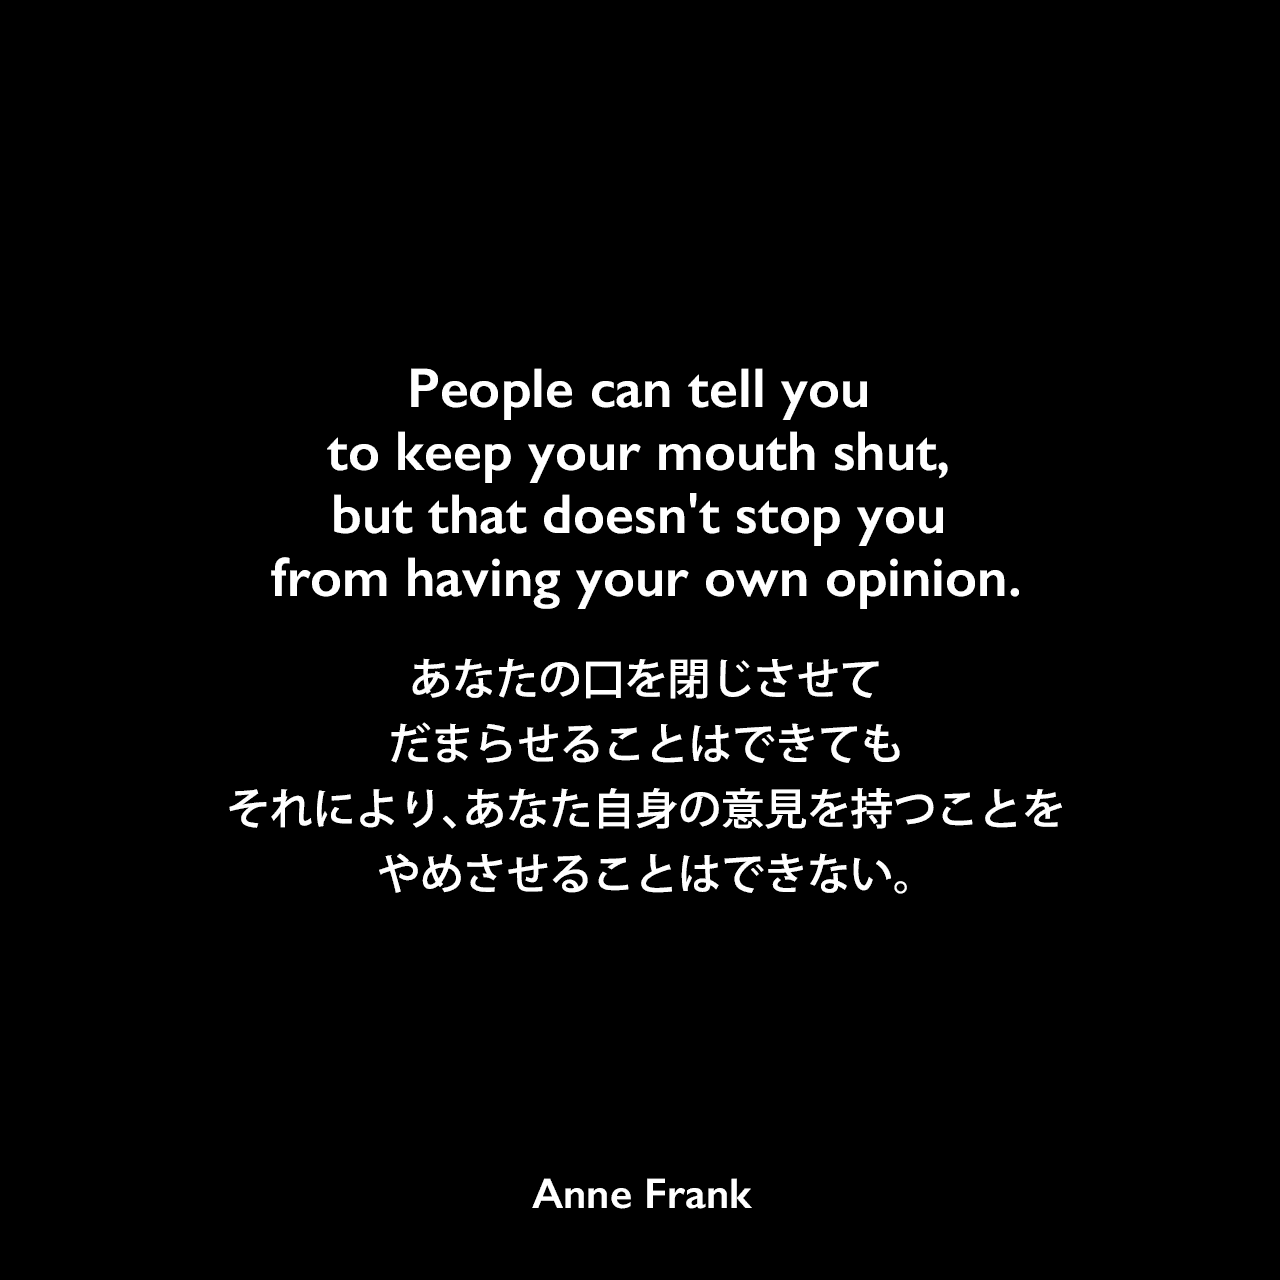 People can tell you to keep your mouth shut, but that doesn't stop you from having your own opinion.あなたの口を閉じさせてだまらせることはできても、それにより、あなた自身の意見を持つことをやめさせることはできない。- 「アンネの日記」よりAnne Frank